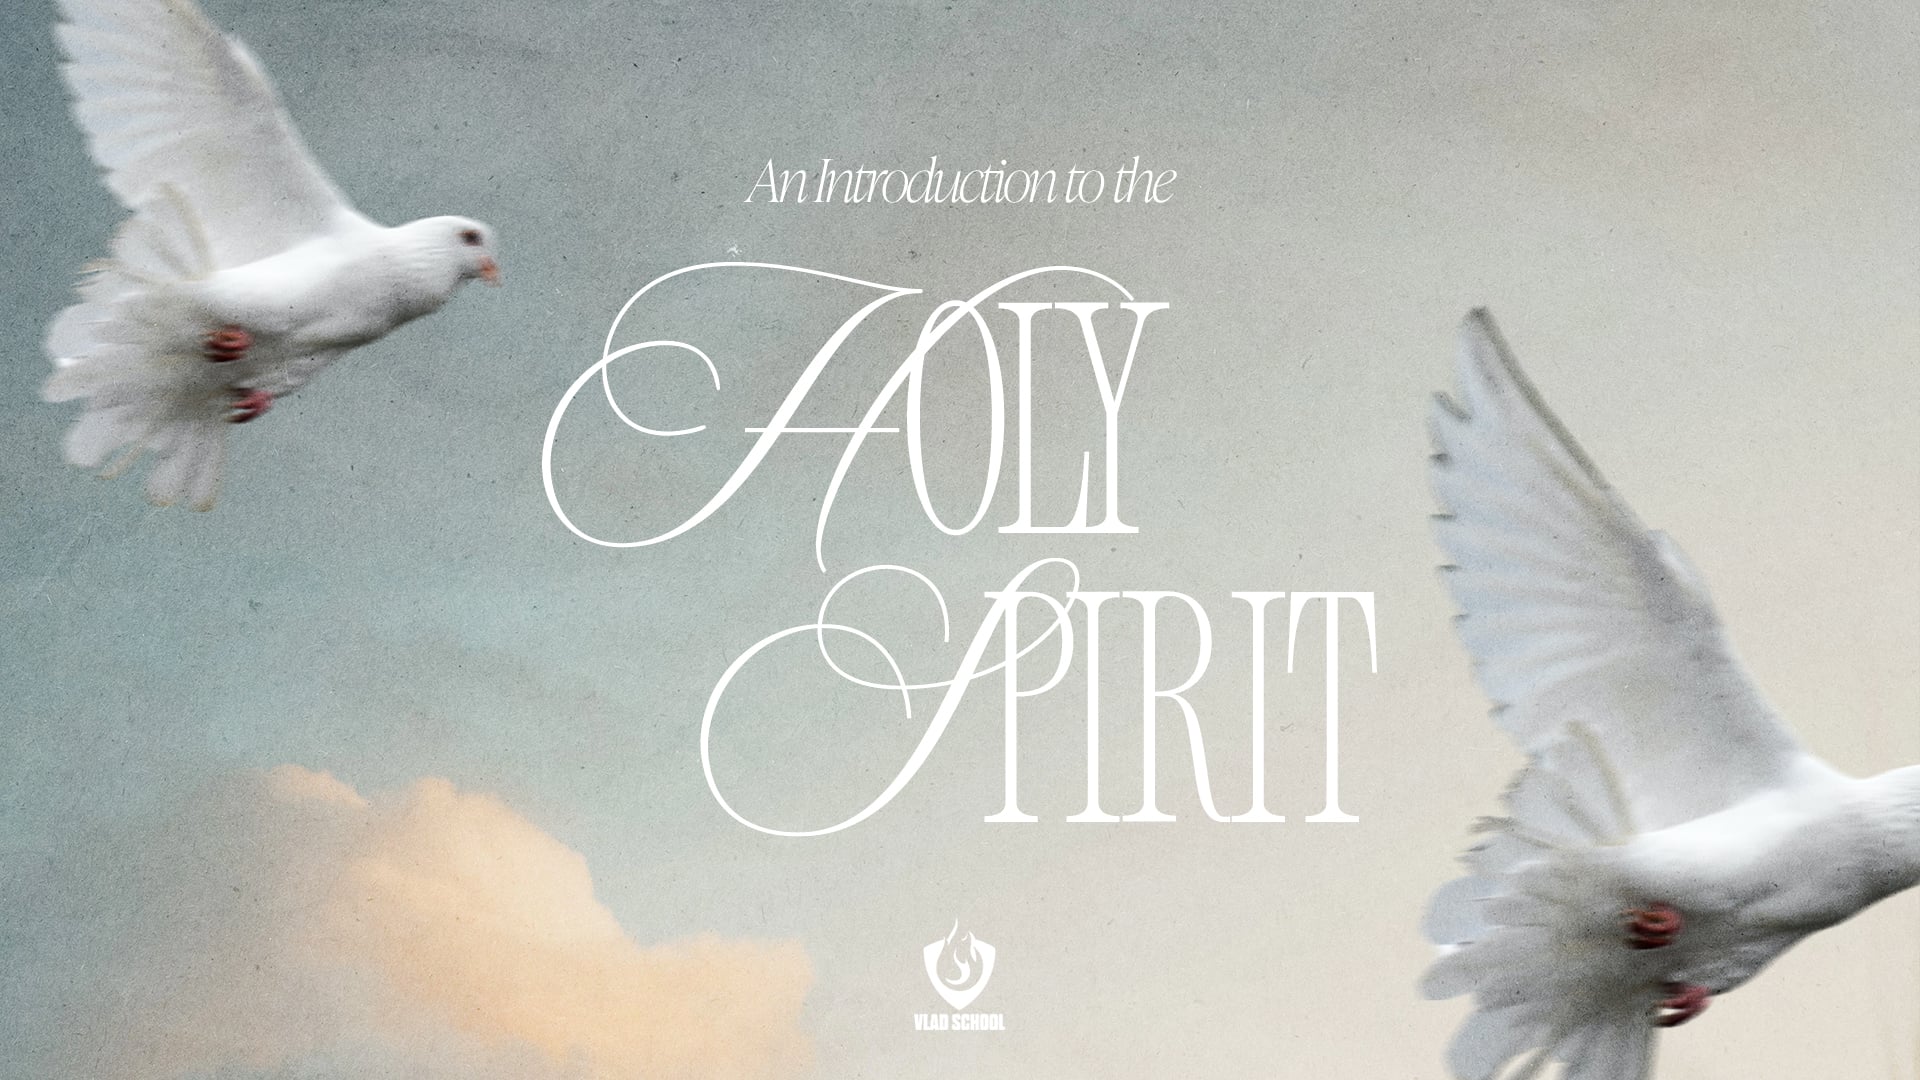 resource - An Introduction to the Holy Spirit